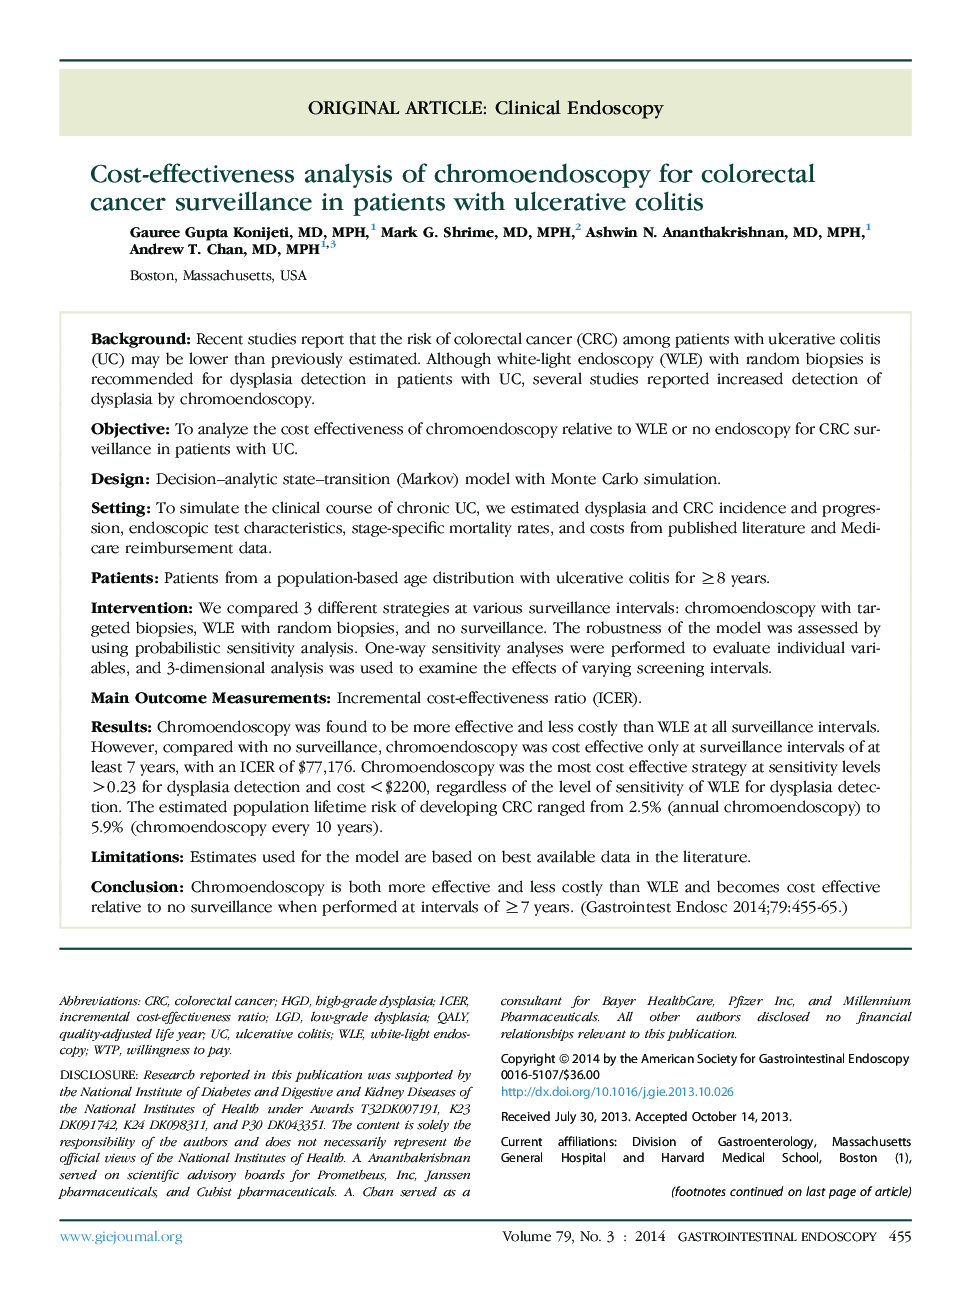 Cost-effectiveness analysis of chromoendoscopy for colorectal cancer surveillance in patients with ulcerative colitis 